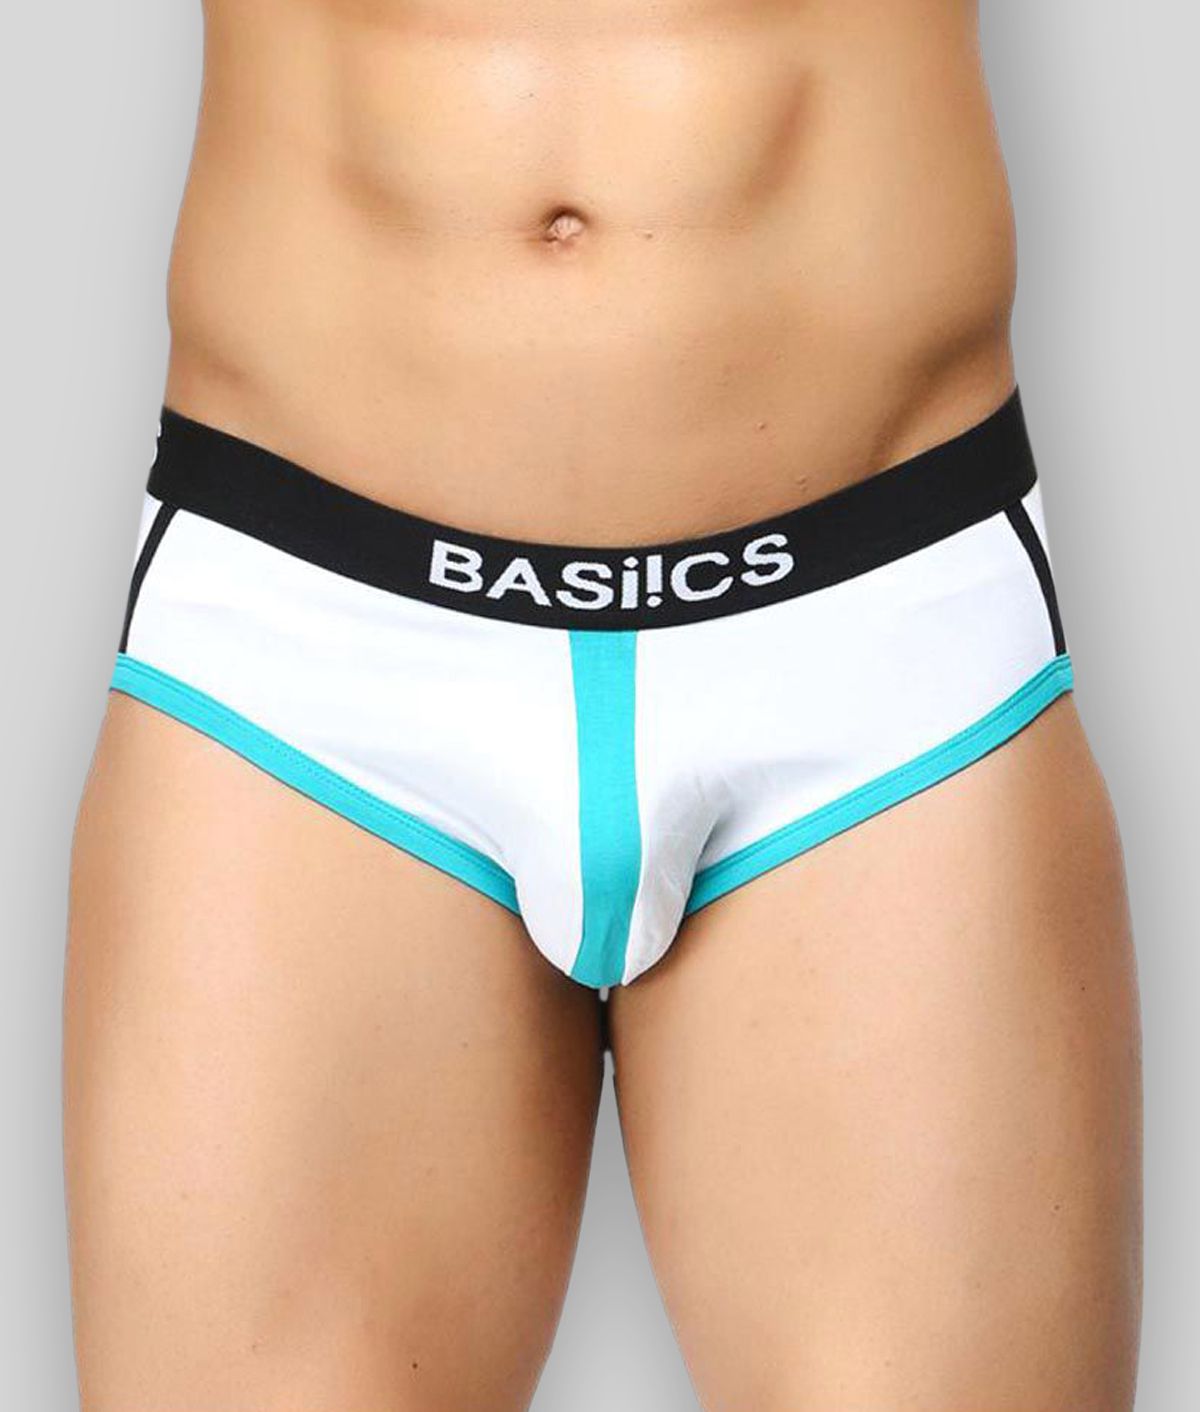     			BASIICS By La Intimo - White Cotton Men's Briefs ( Pack of 1 )